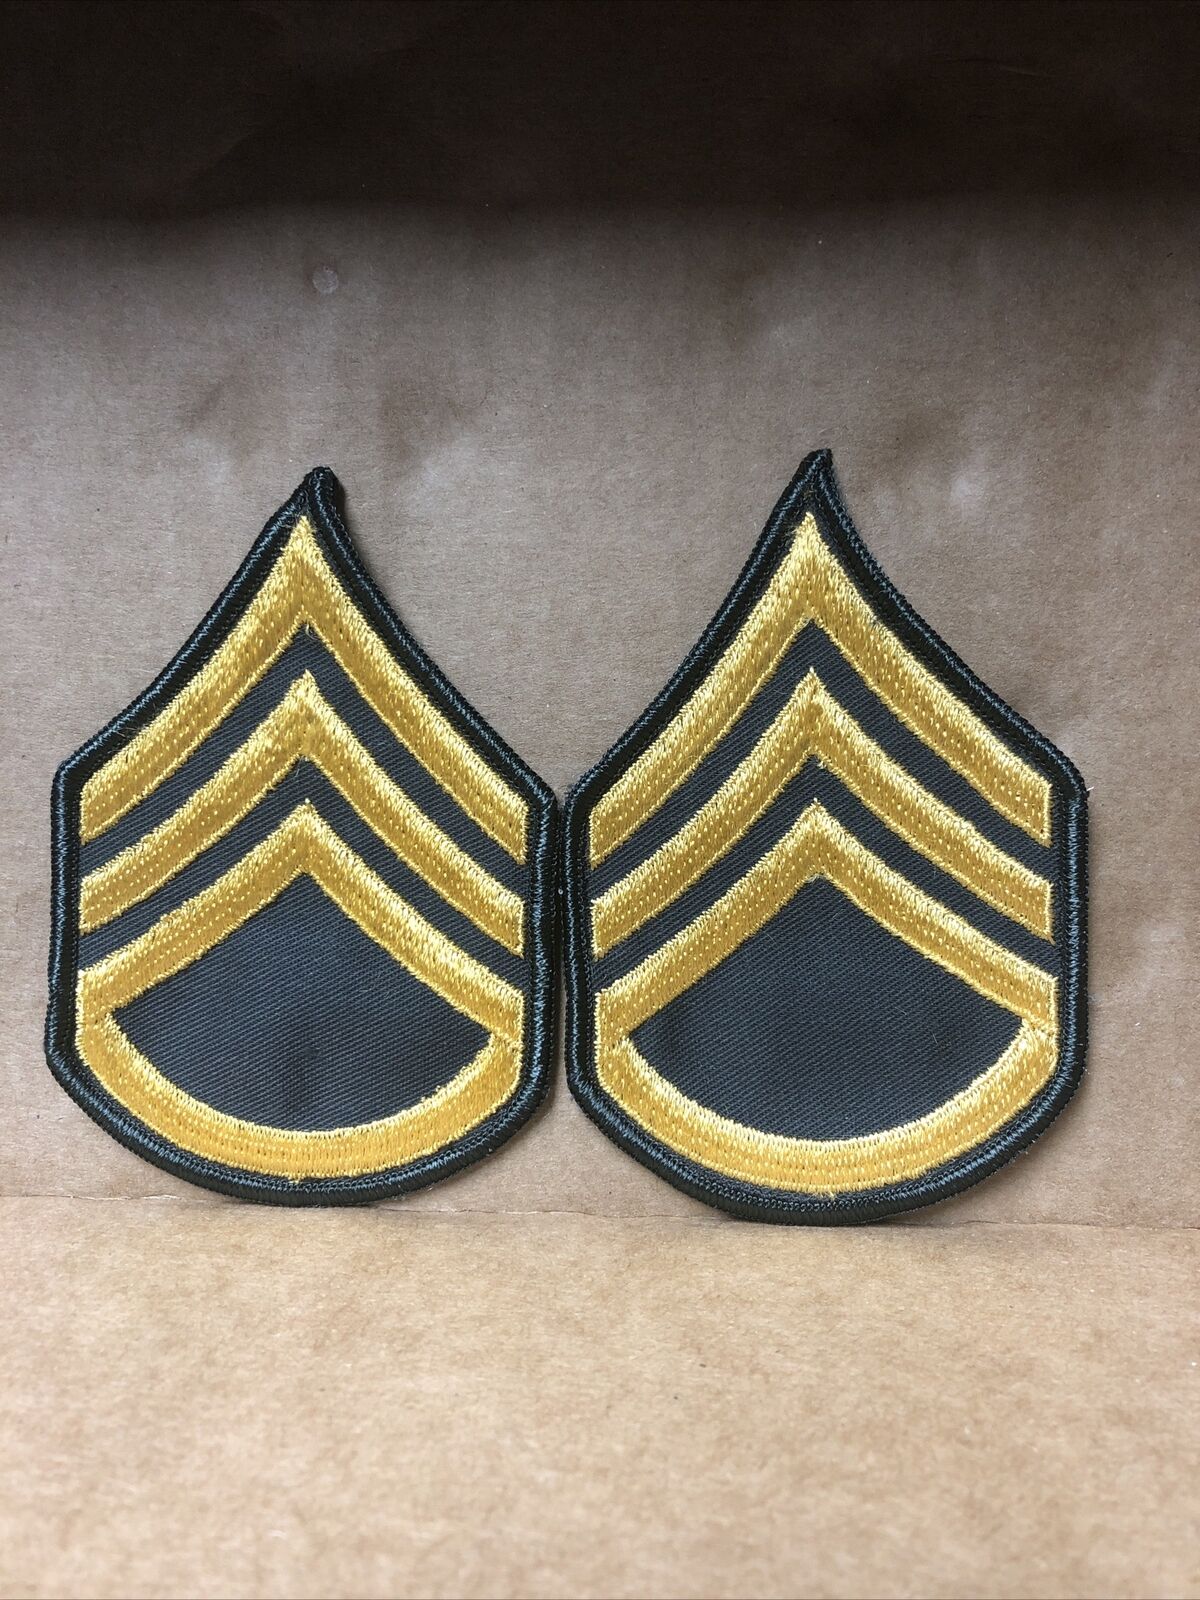 US Army Class A Staff Sergeant E-6 Green/Yellow Patch Set of 2 Sew-On New A2_A39